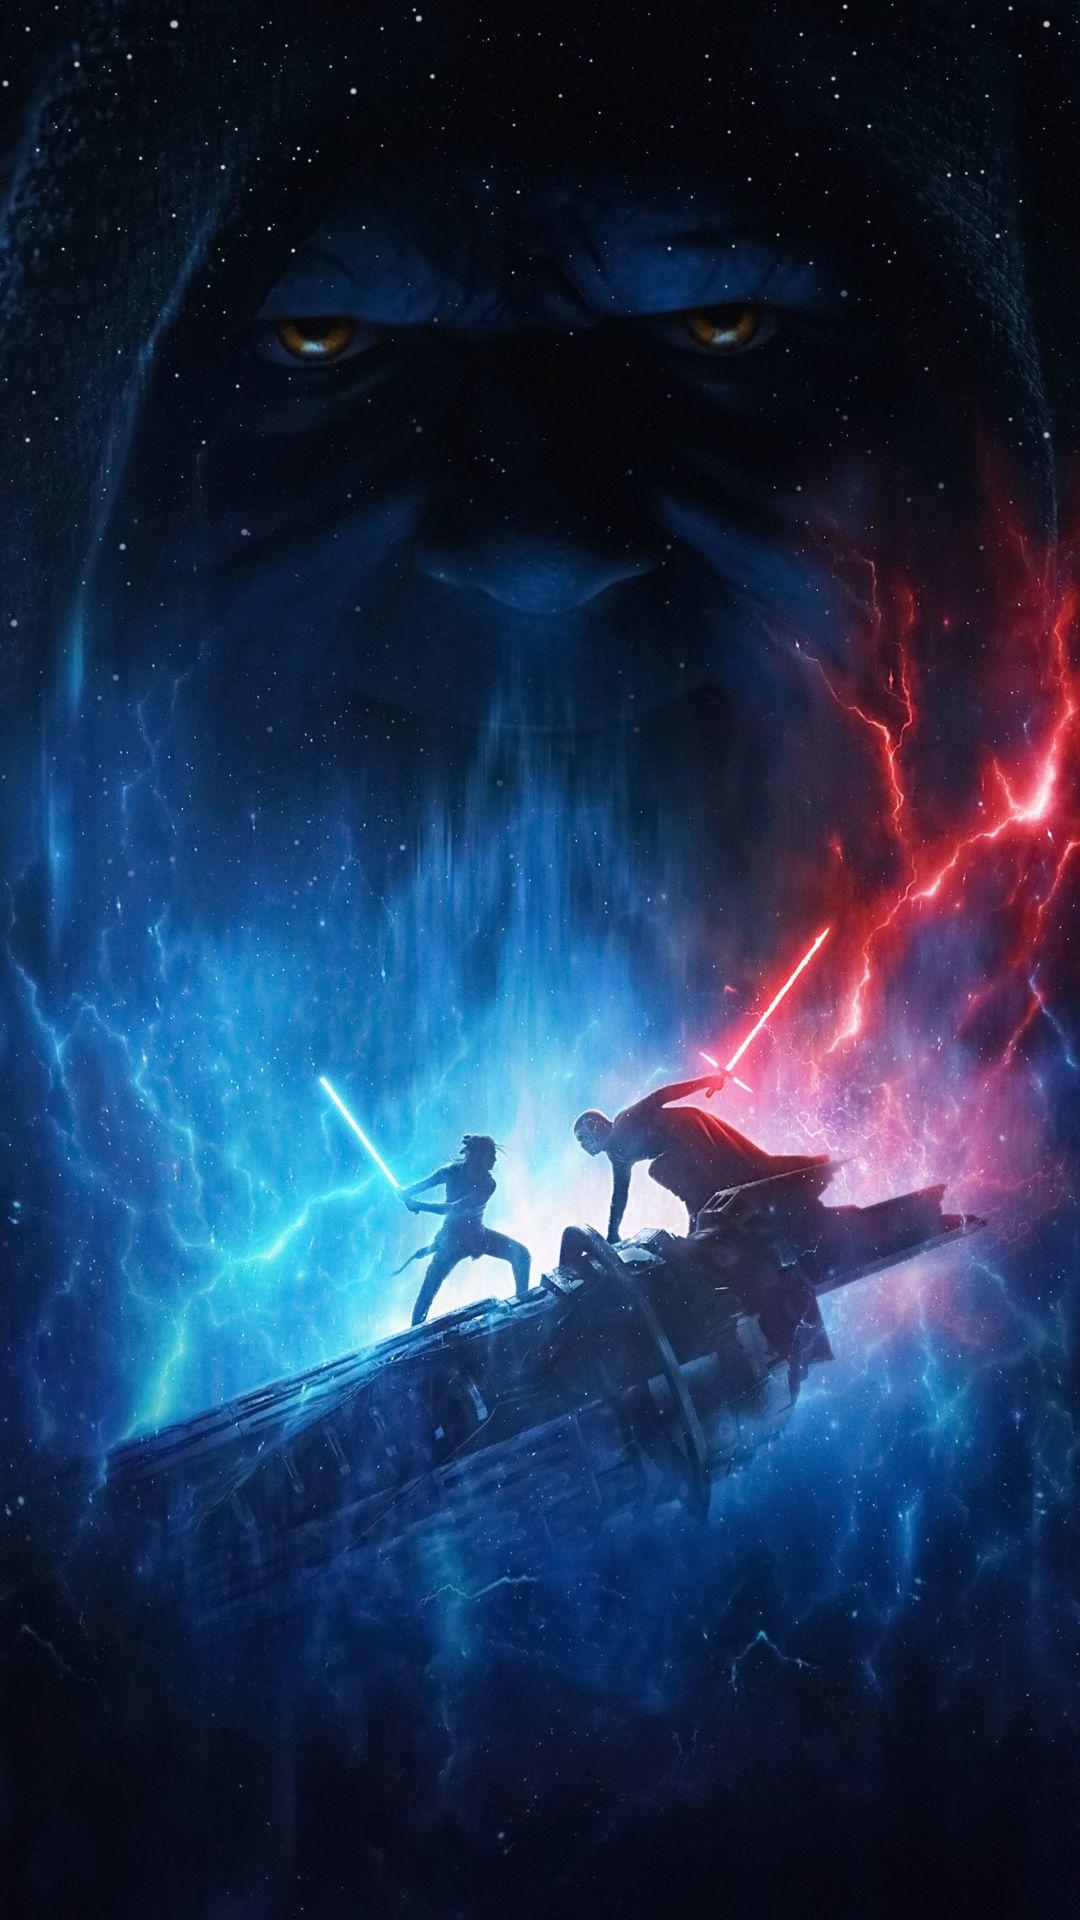 Star Wars 1080x19 Wallpapers Top Free Star Wars 1080x19 Backgrounds Wallpaperaccess